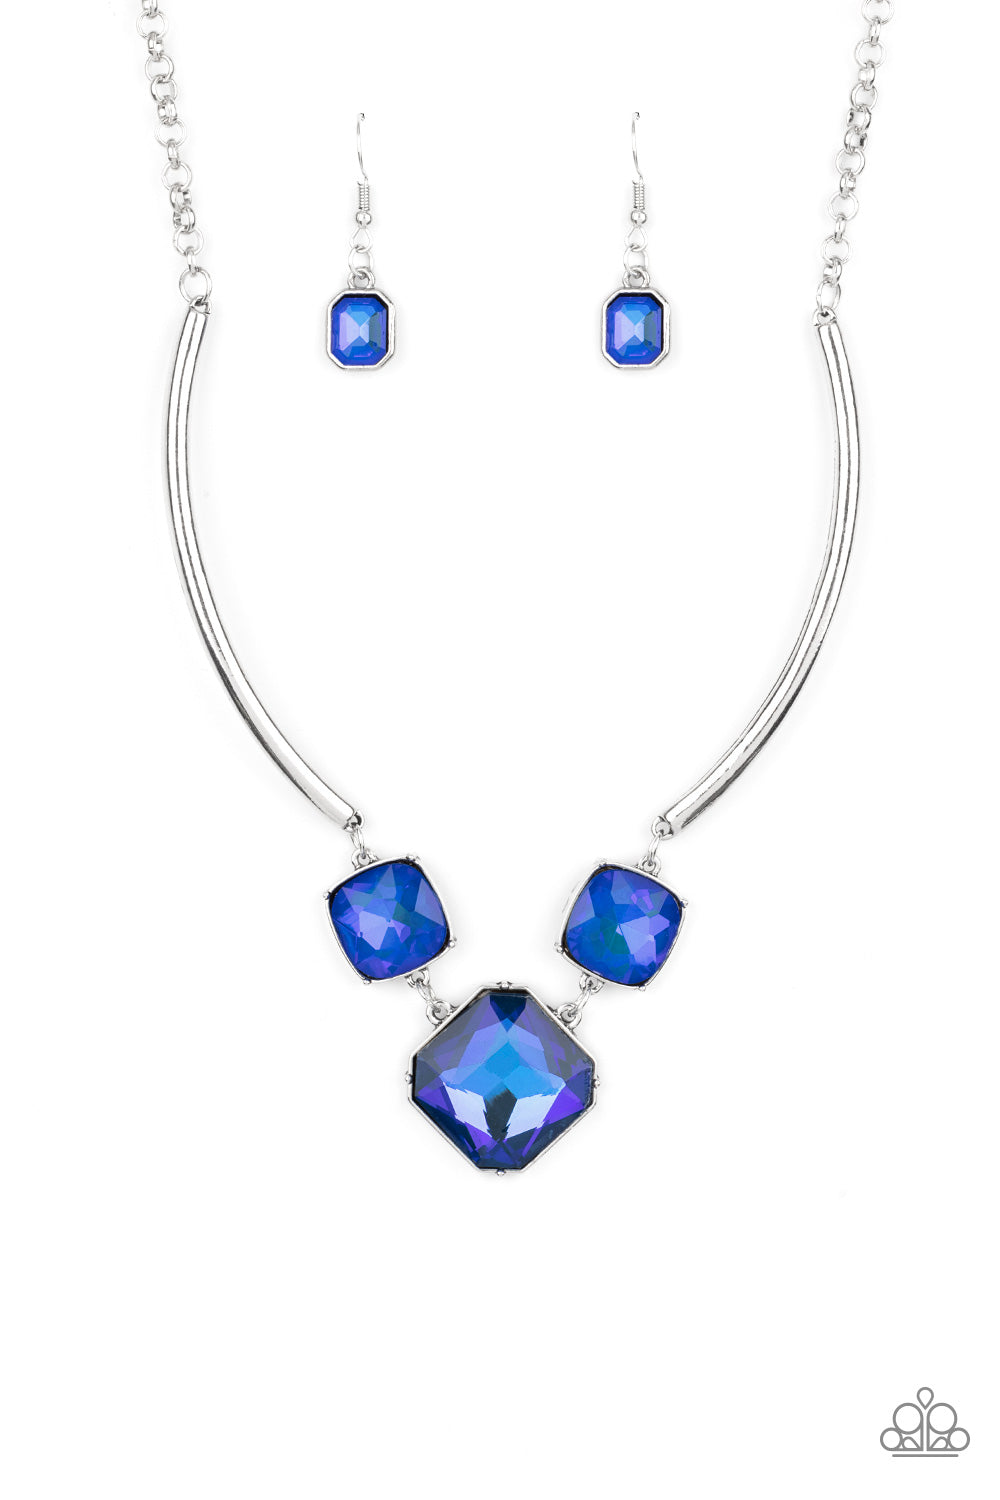 Divine IRIDESCENCE - Paparazzi - Blue Iridescent Gem Silver Life of the Party Necklace